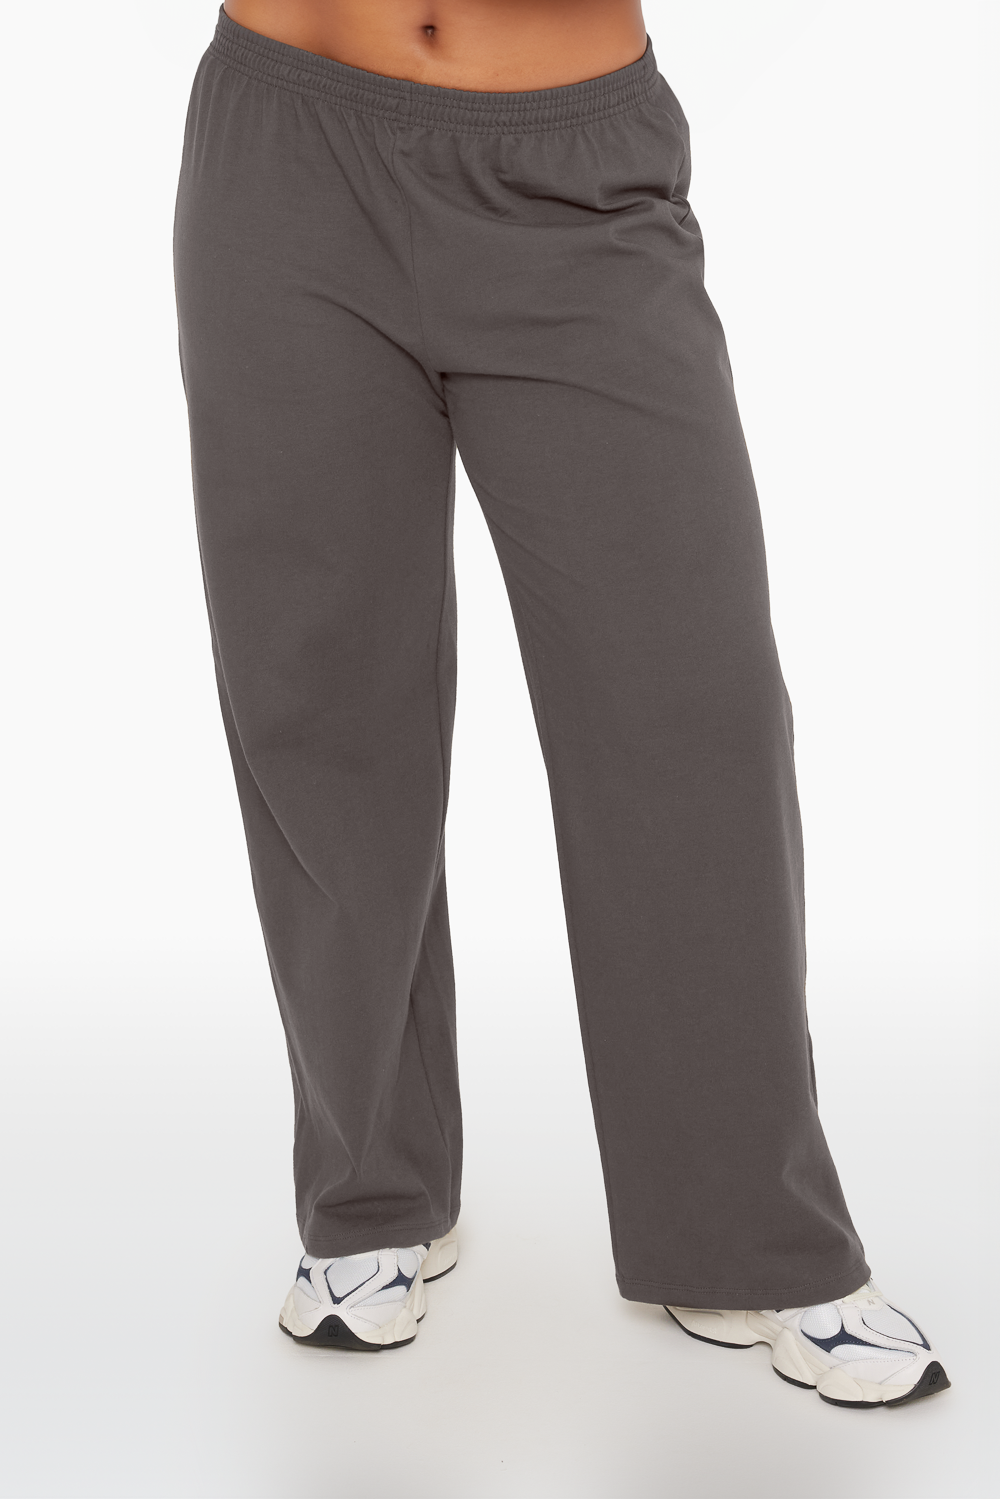 HEAVY COTTON EASY PANTS - GRAPHITE Featured Image